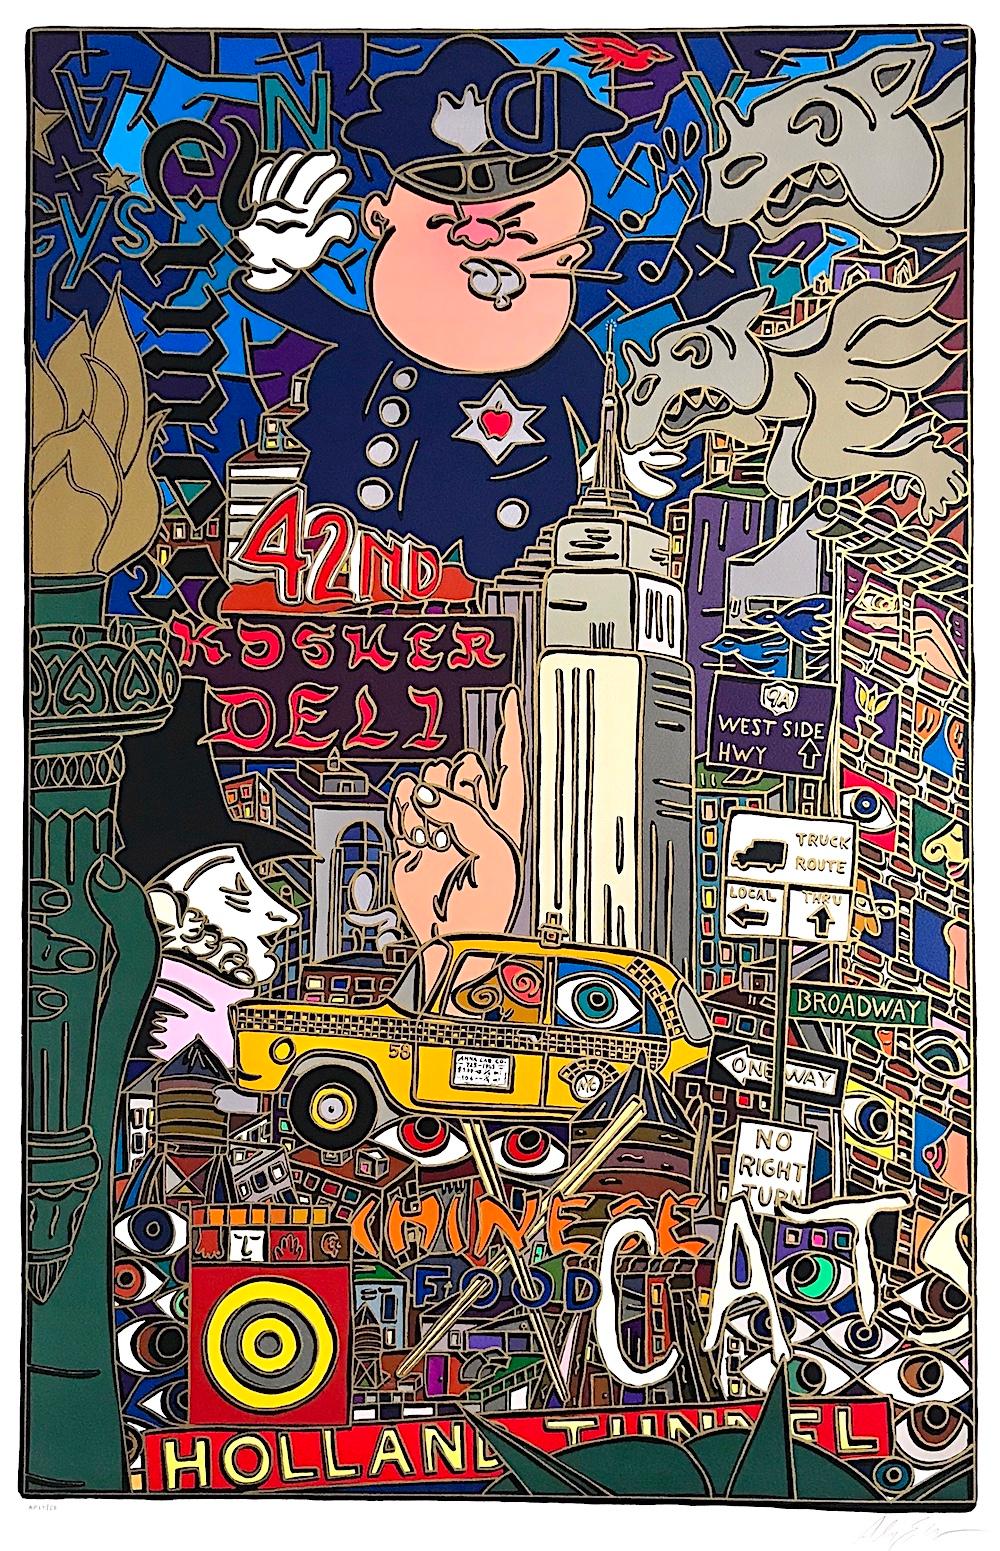 THE BIG APPLE, NEW YORK CITY Signed Lithograph, Police, Taxi, Pop Art Cityscape - Print by Alex Echo